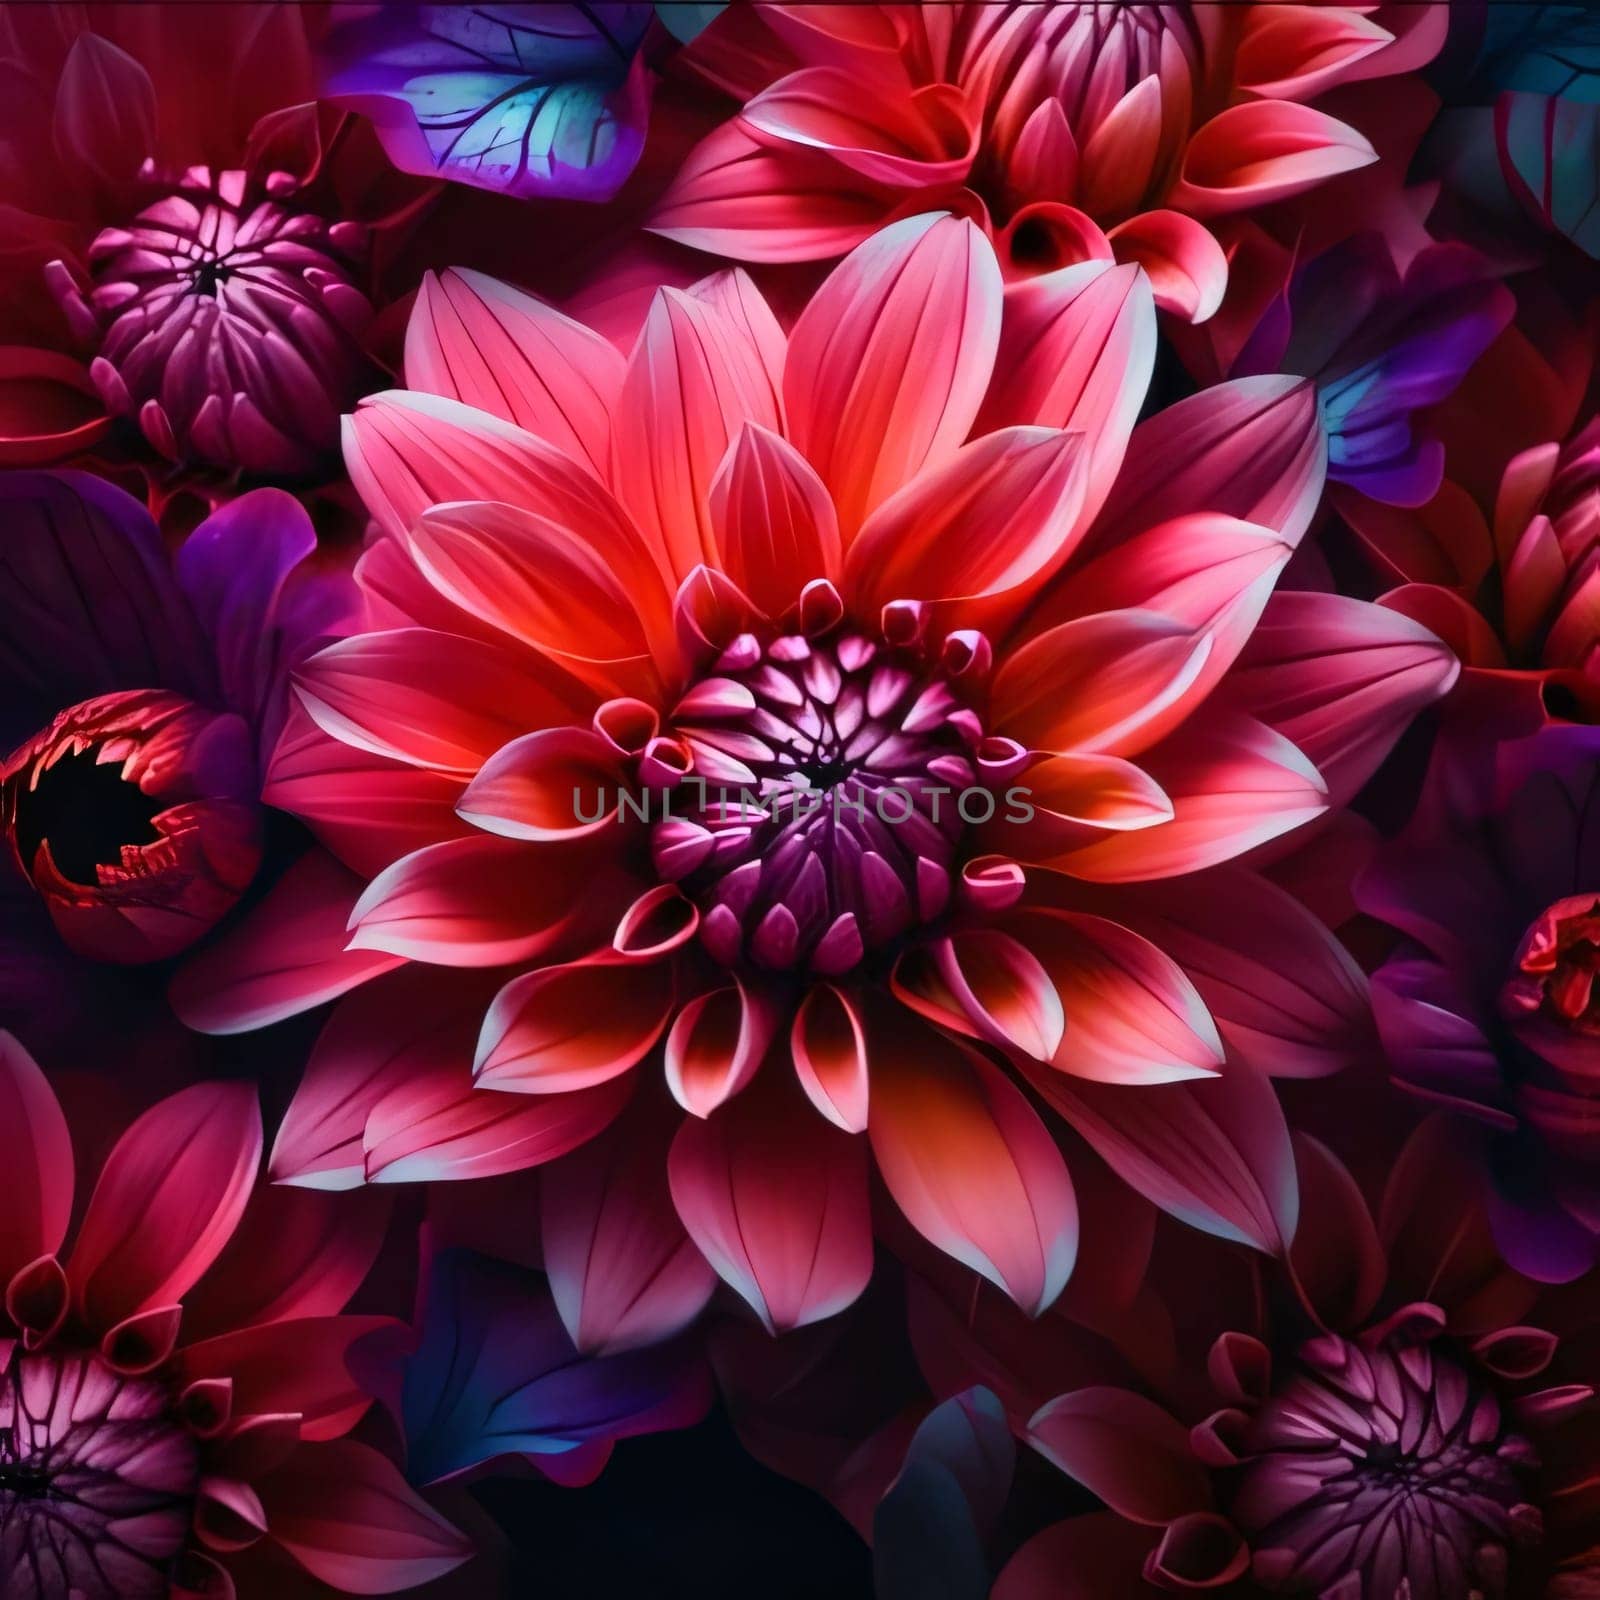 Dahlia flower in close up view from above. Flowering flowers, a symbol of spring, new life. by ThemesS